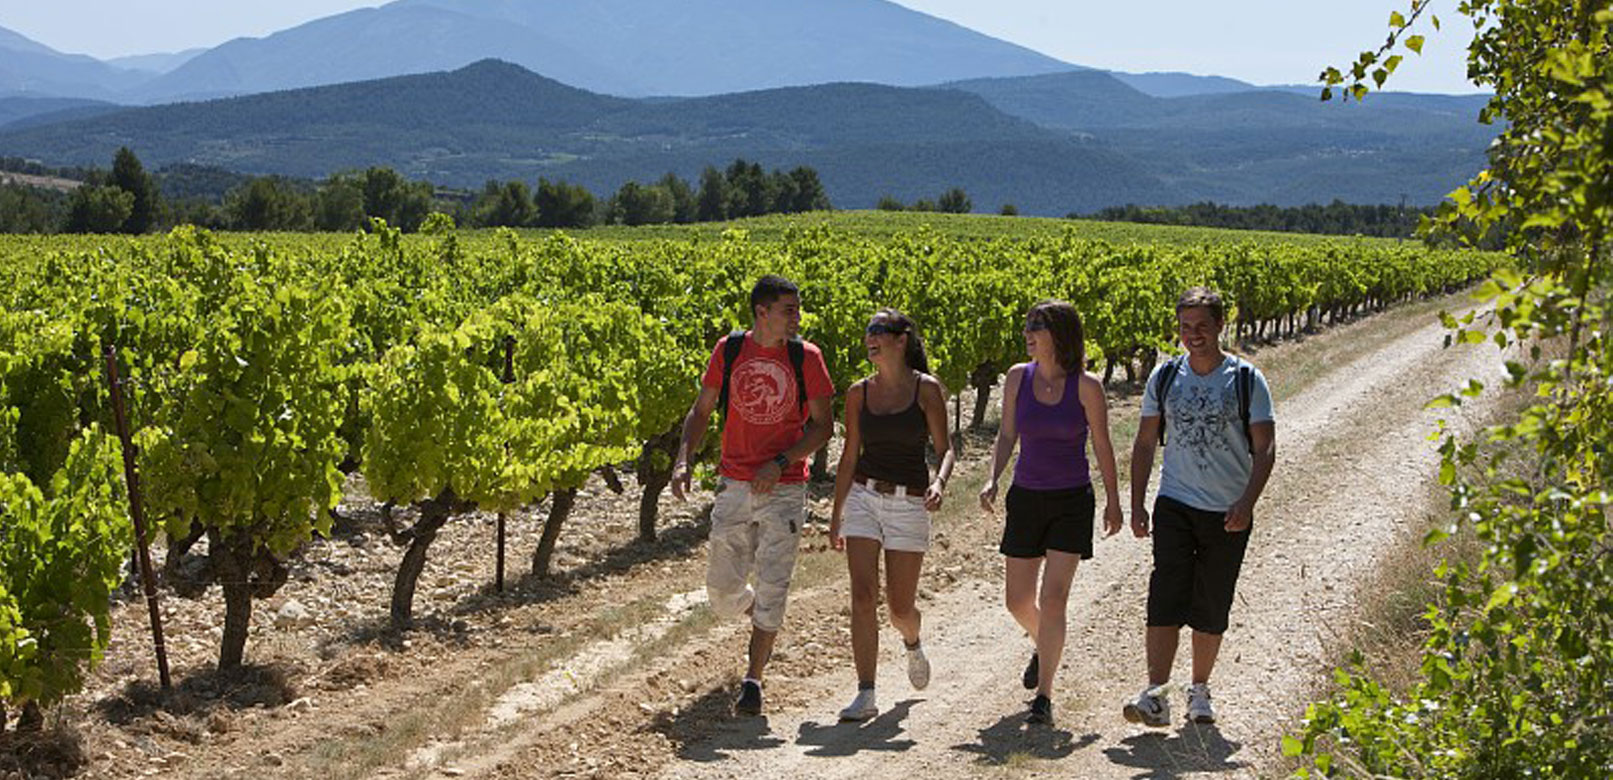 Hiking throught the vineyards © Grilhe